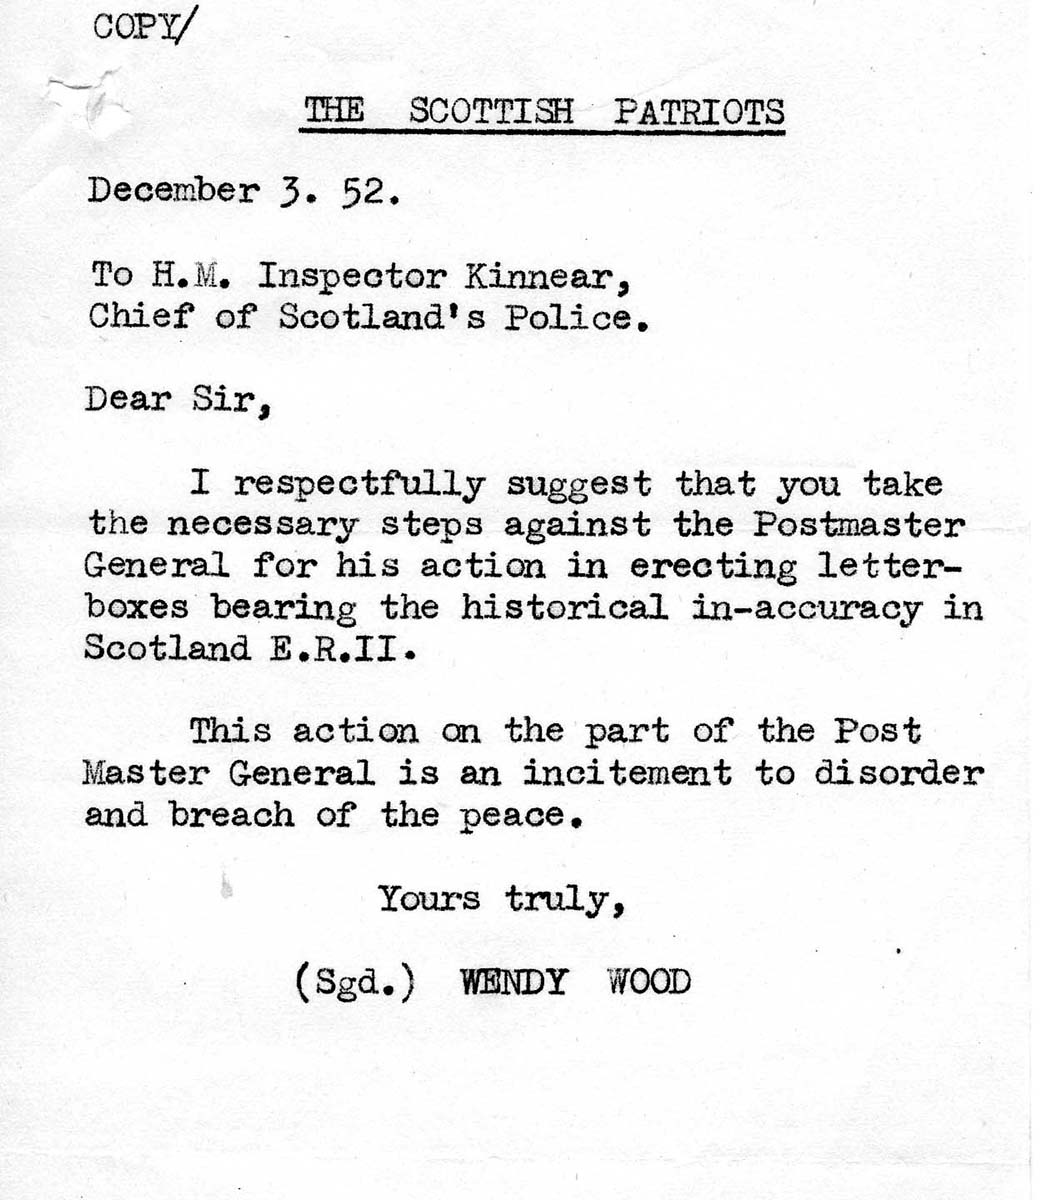 A scan of a typewritten letter. It says: SCOTTISH PATRIOTS. December 3. 52. To H.M. Inspector Kinnear, Chief of Scotland's Police. Dear Sir, I respectfully suggest that you take the necessary steps against the Postmaster General for his action in erecting letterboxes bearing the historical inaccuracy in Scotland E.R.II. This action an the part of the Postmaster General is an incitement to disorder and breach of the peace. Yours truly, signed Wendy Wood